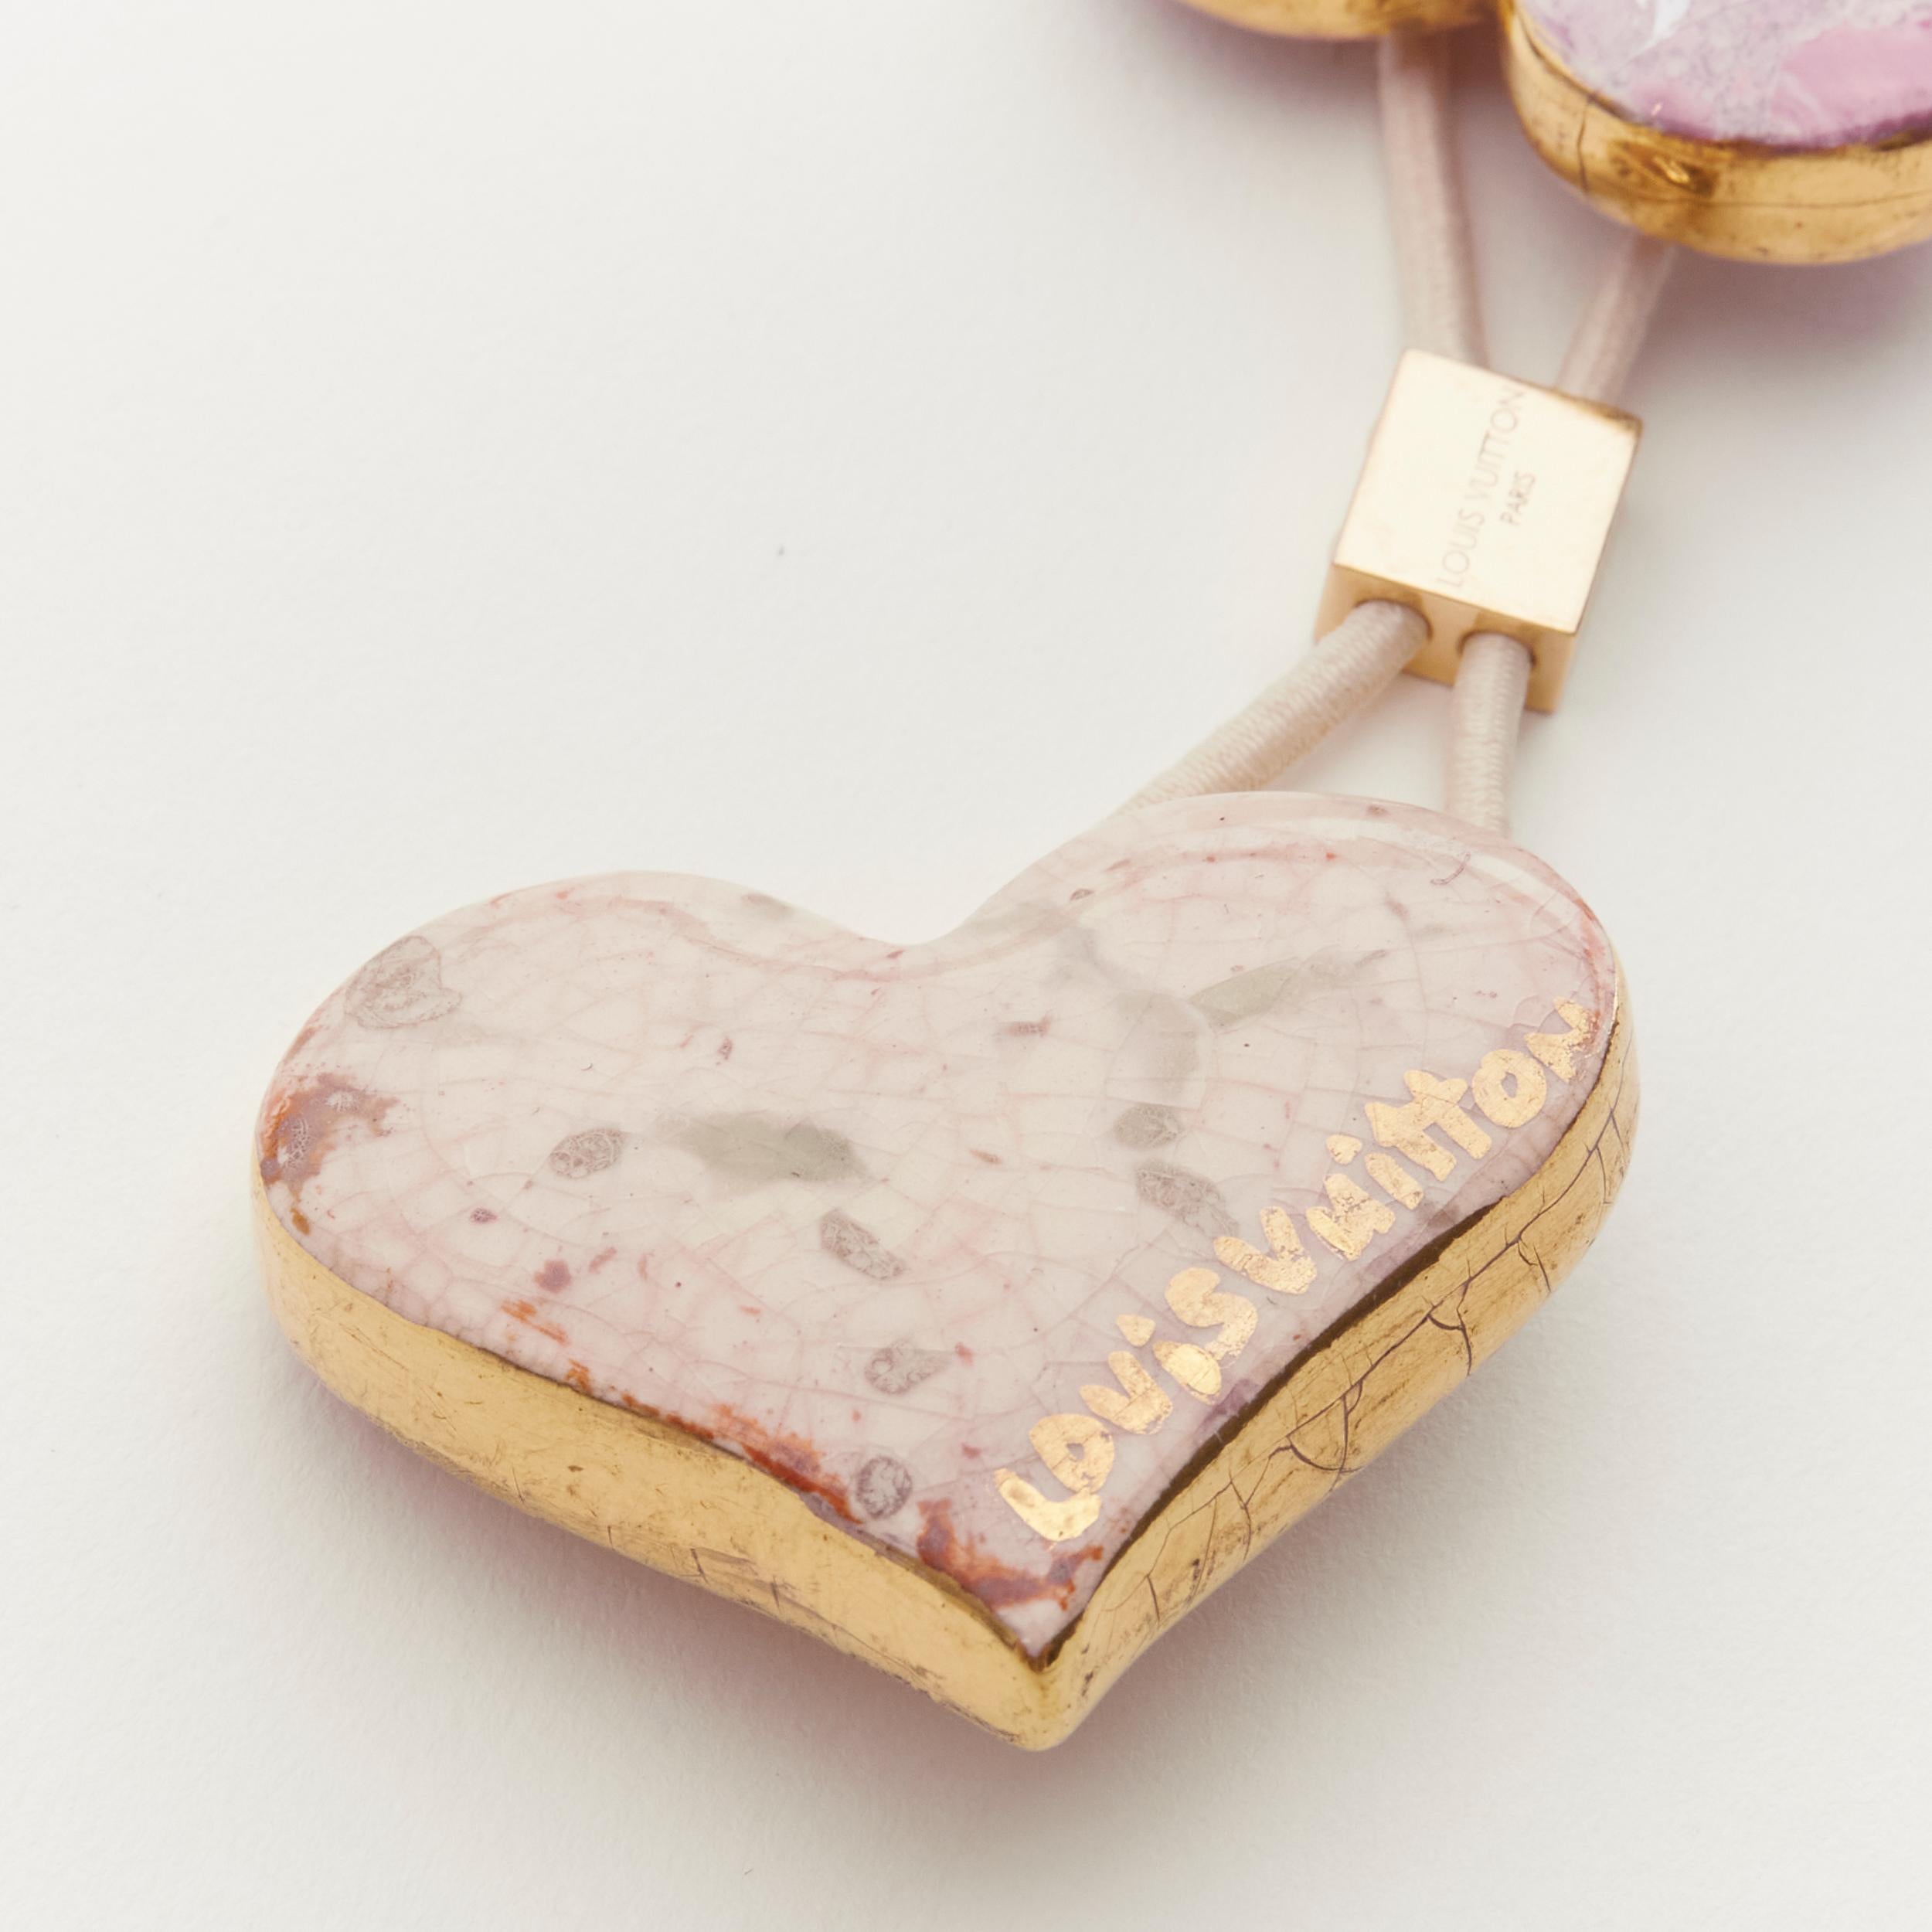 rare LOUIS VUITTON Stephen Sprouse pink stone enamel heart floral hair tie 
Reference: ANWU/A00135 
Brand: Louis Vuitton 
Designer: Marc Jacobs 
Collection: Stephen Sprouse 
Material: Metal 
Color: Pink 
Pattern: Solid 
Extra Detail: LOUIS VUITTON